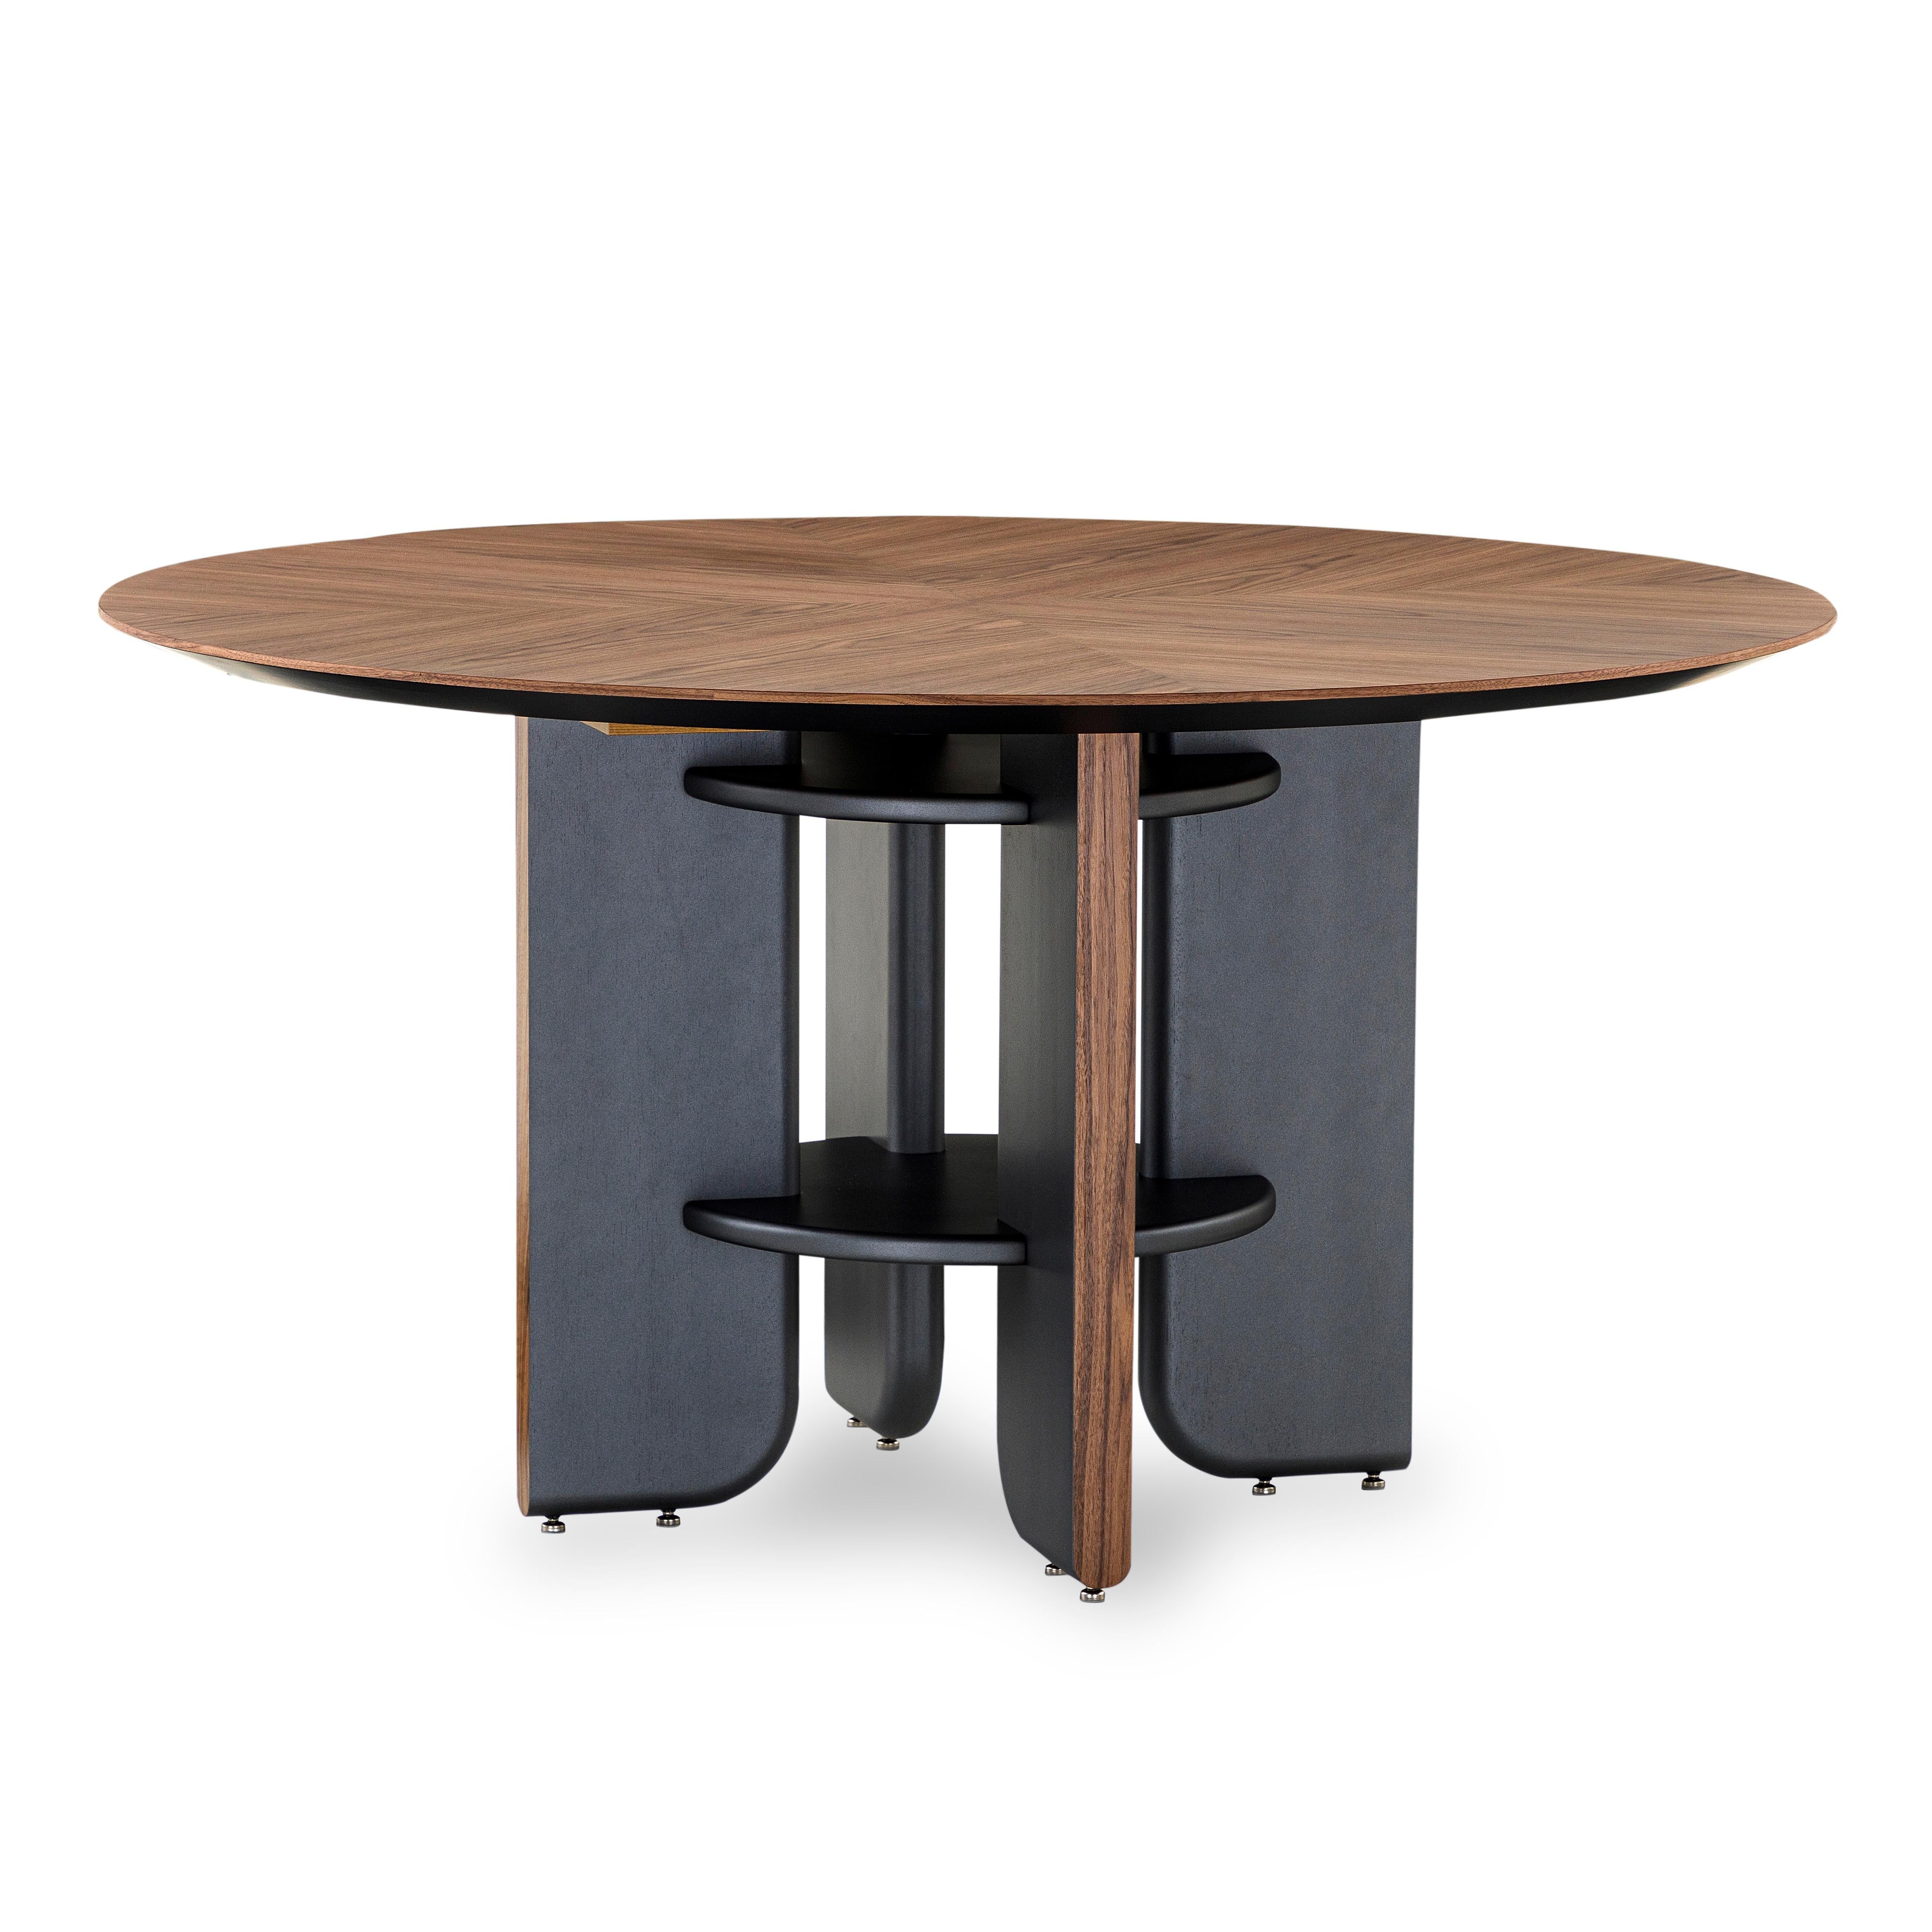 This round dining table in a walnut veneered top finish with black wood legs is the perfect table for your house. Every dining space needs a good dining table and the Moon round table is going to be perfect for that space, with an exclusive design